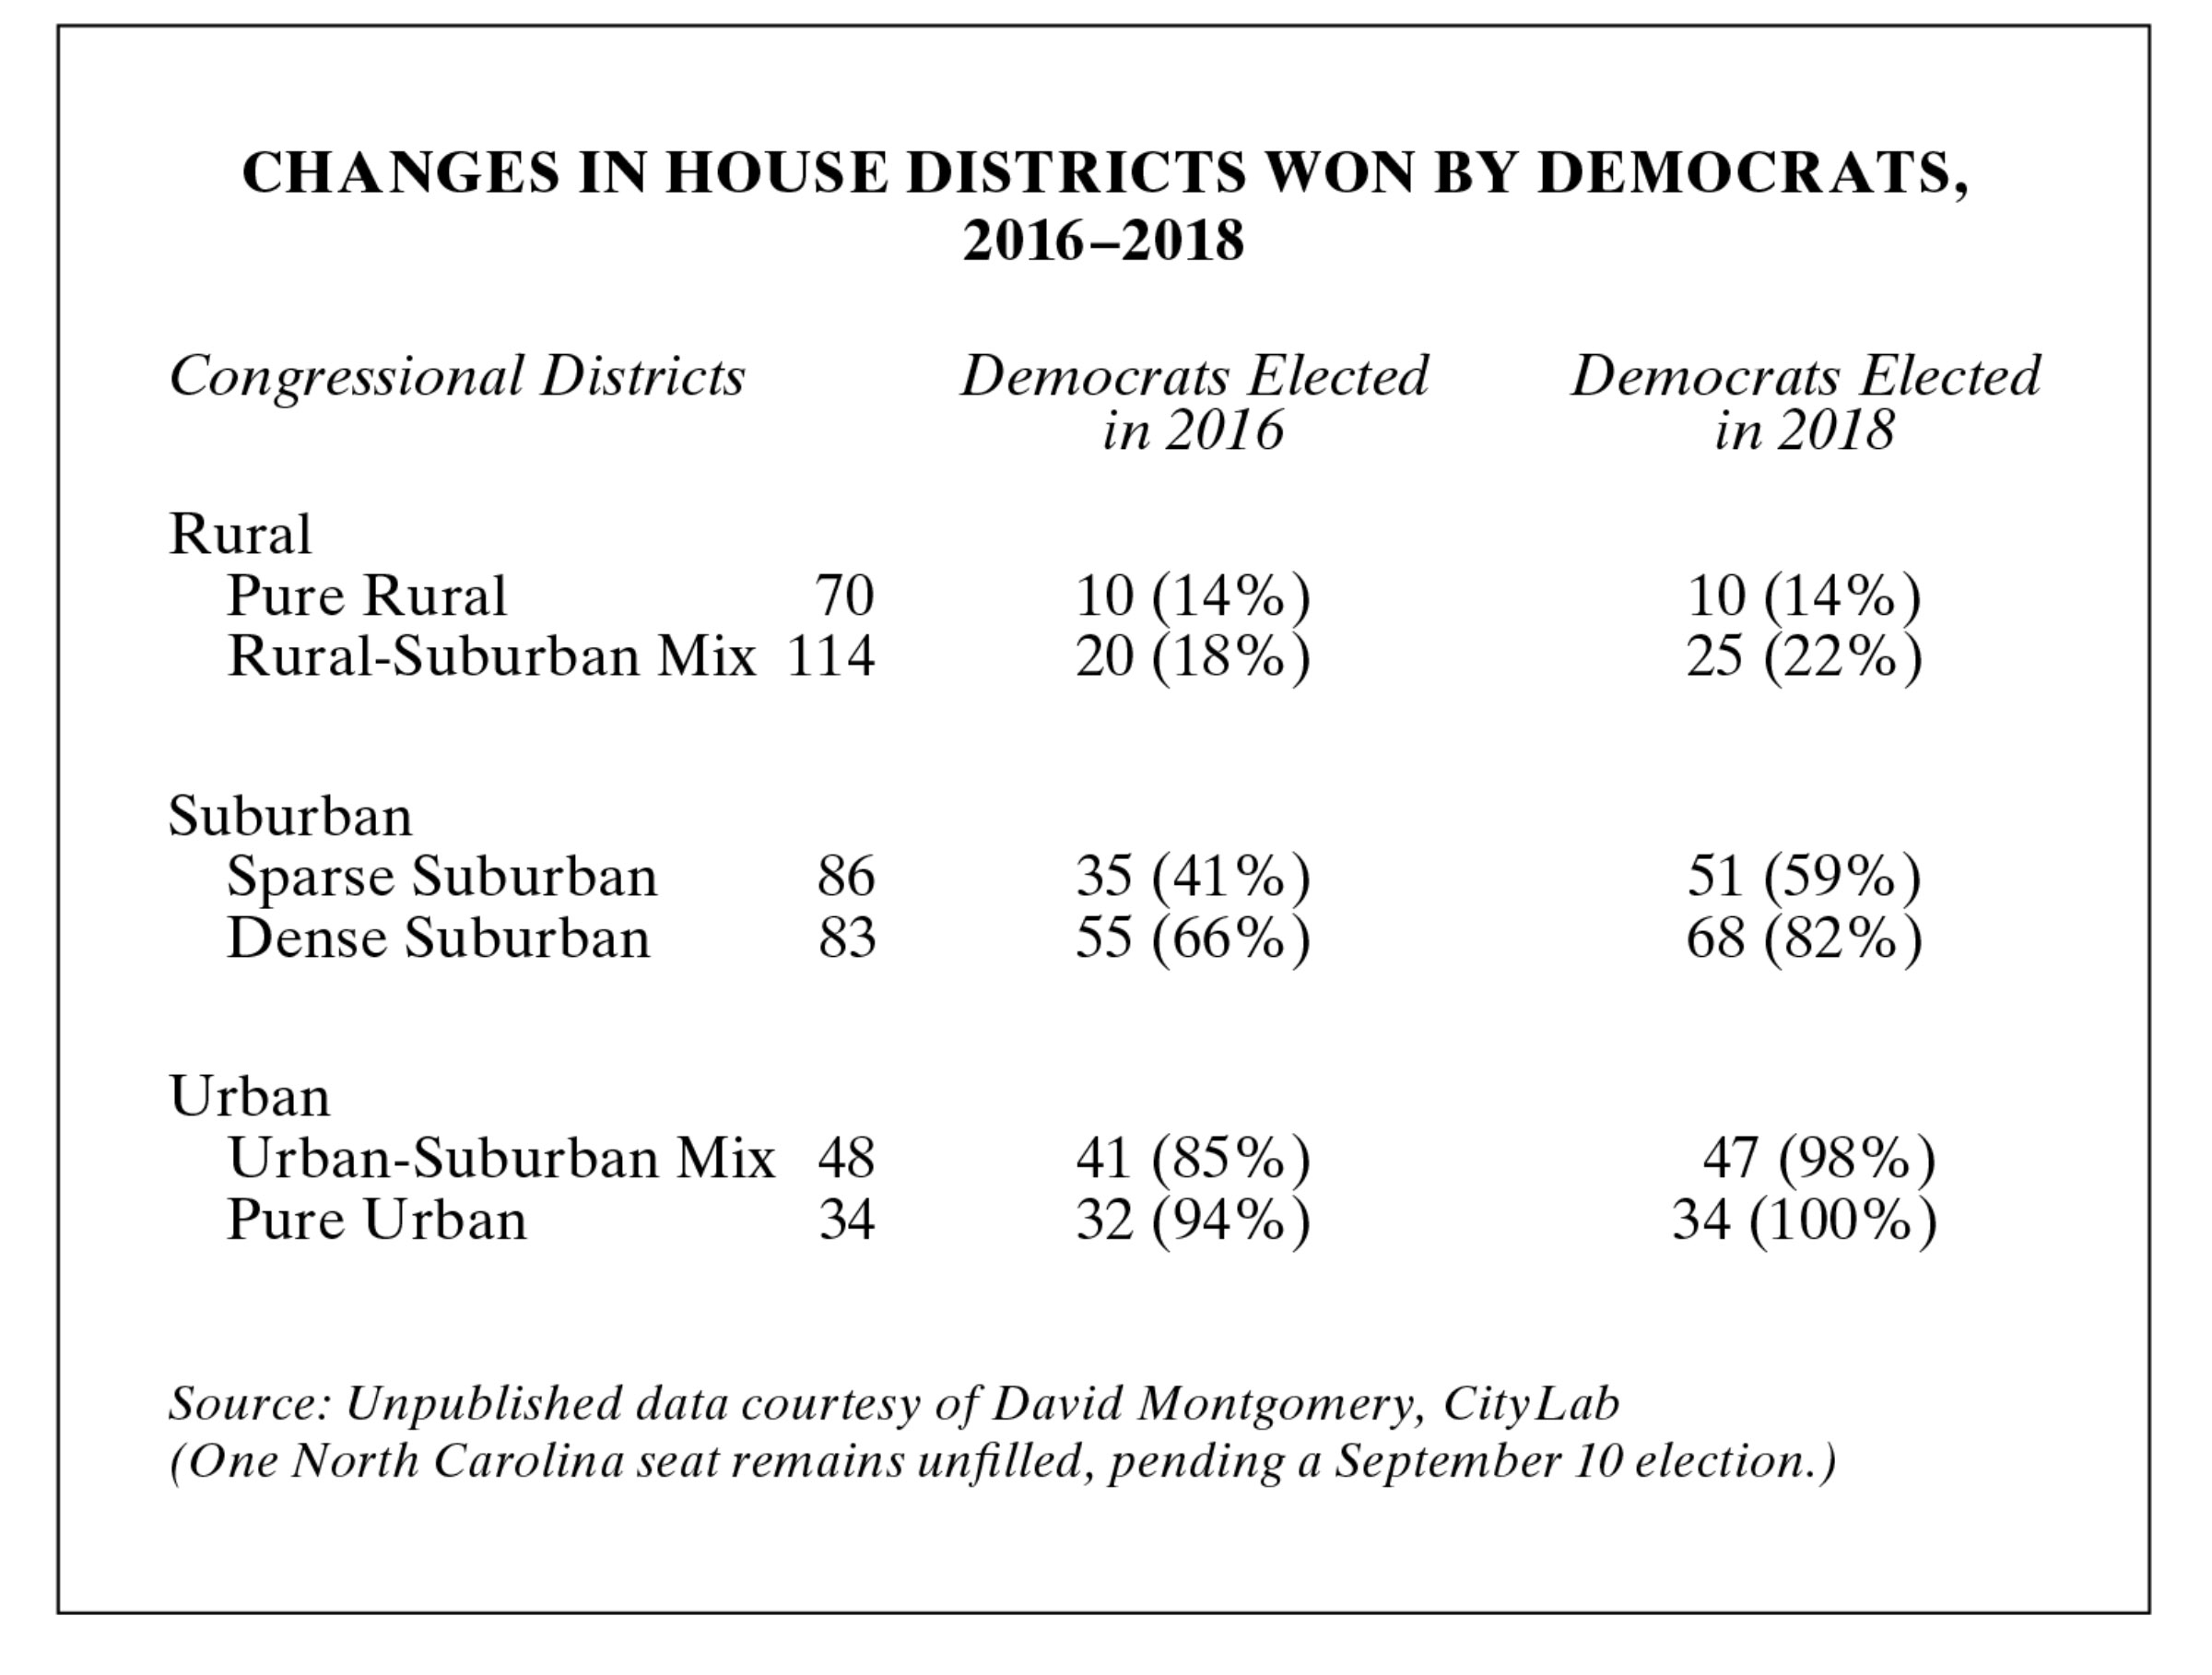 Table of changes in house districts won by democrats, 2016-2018